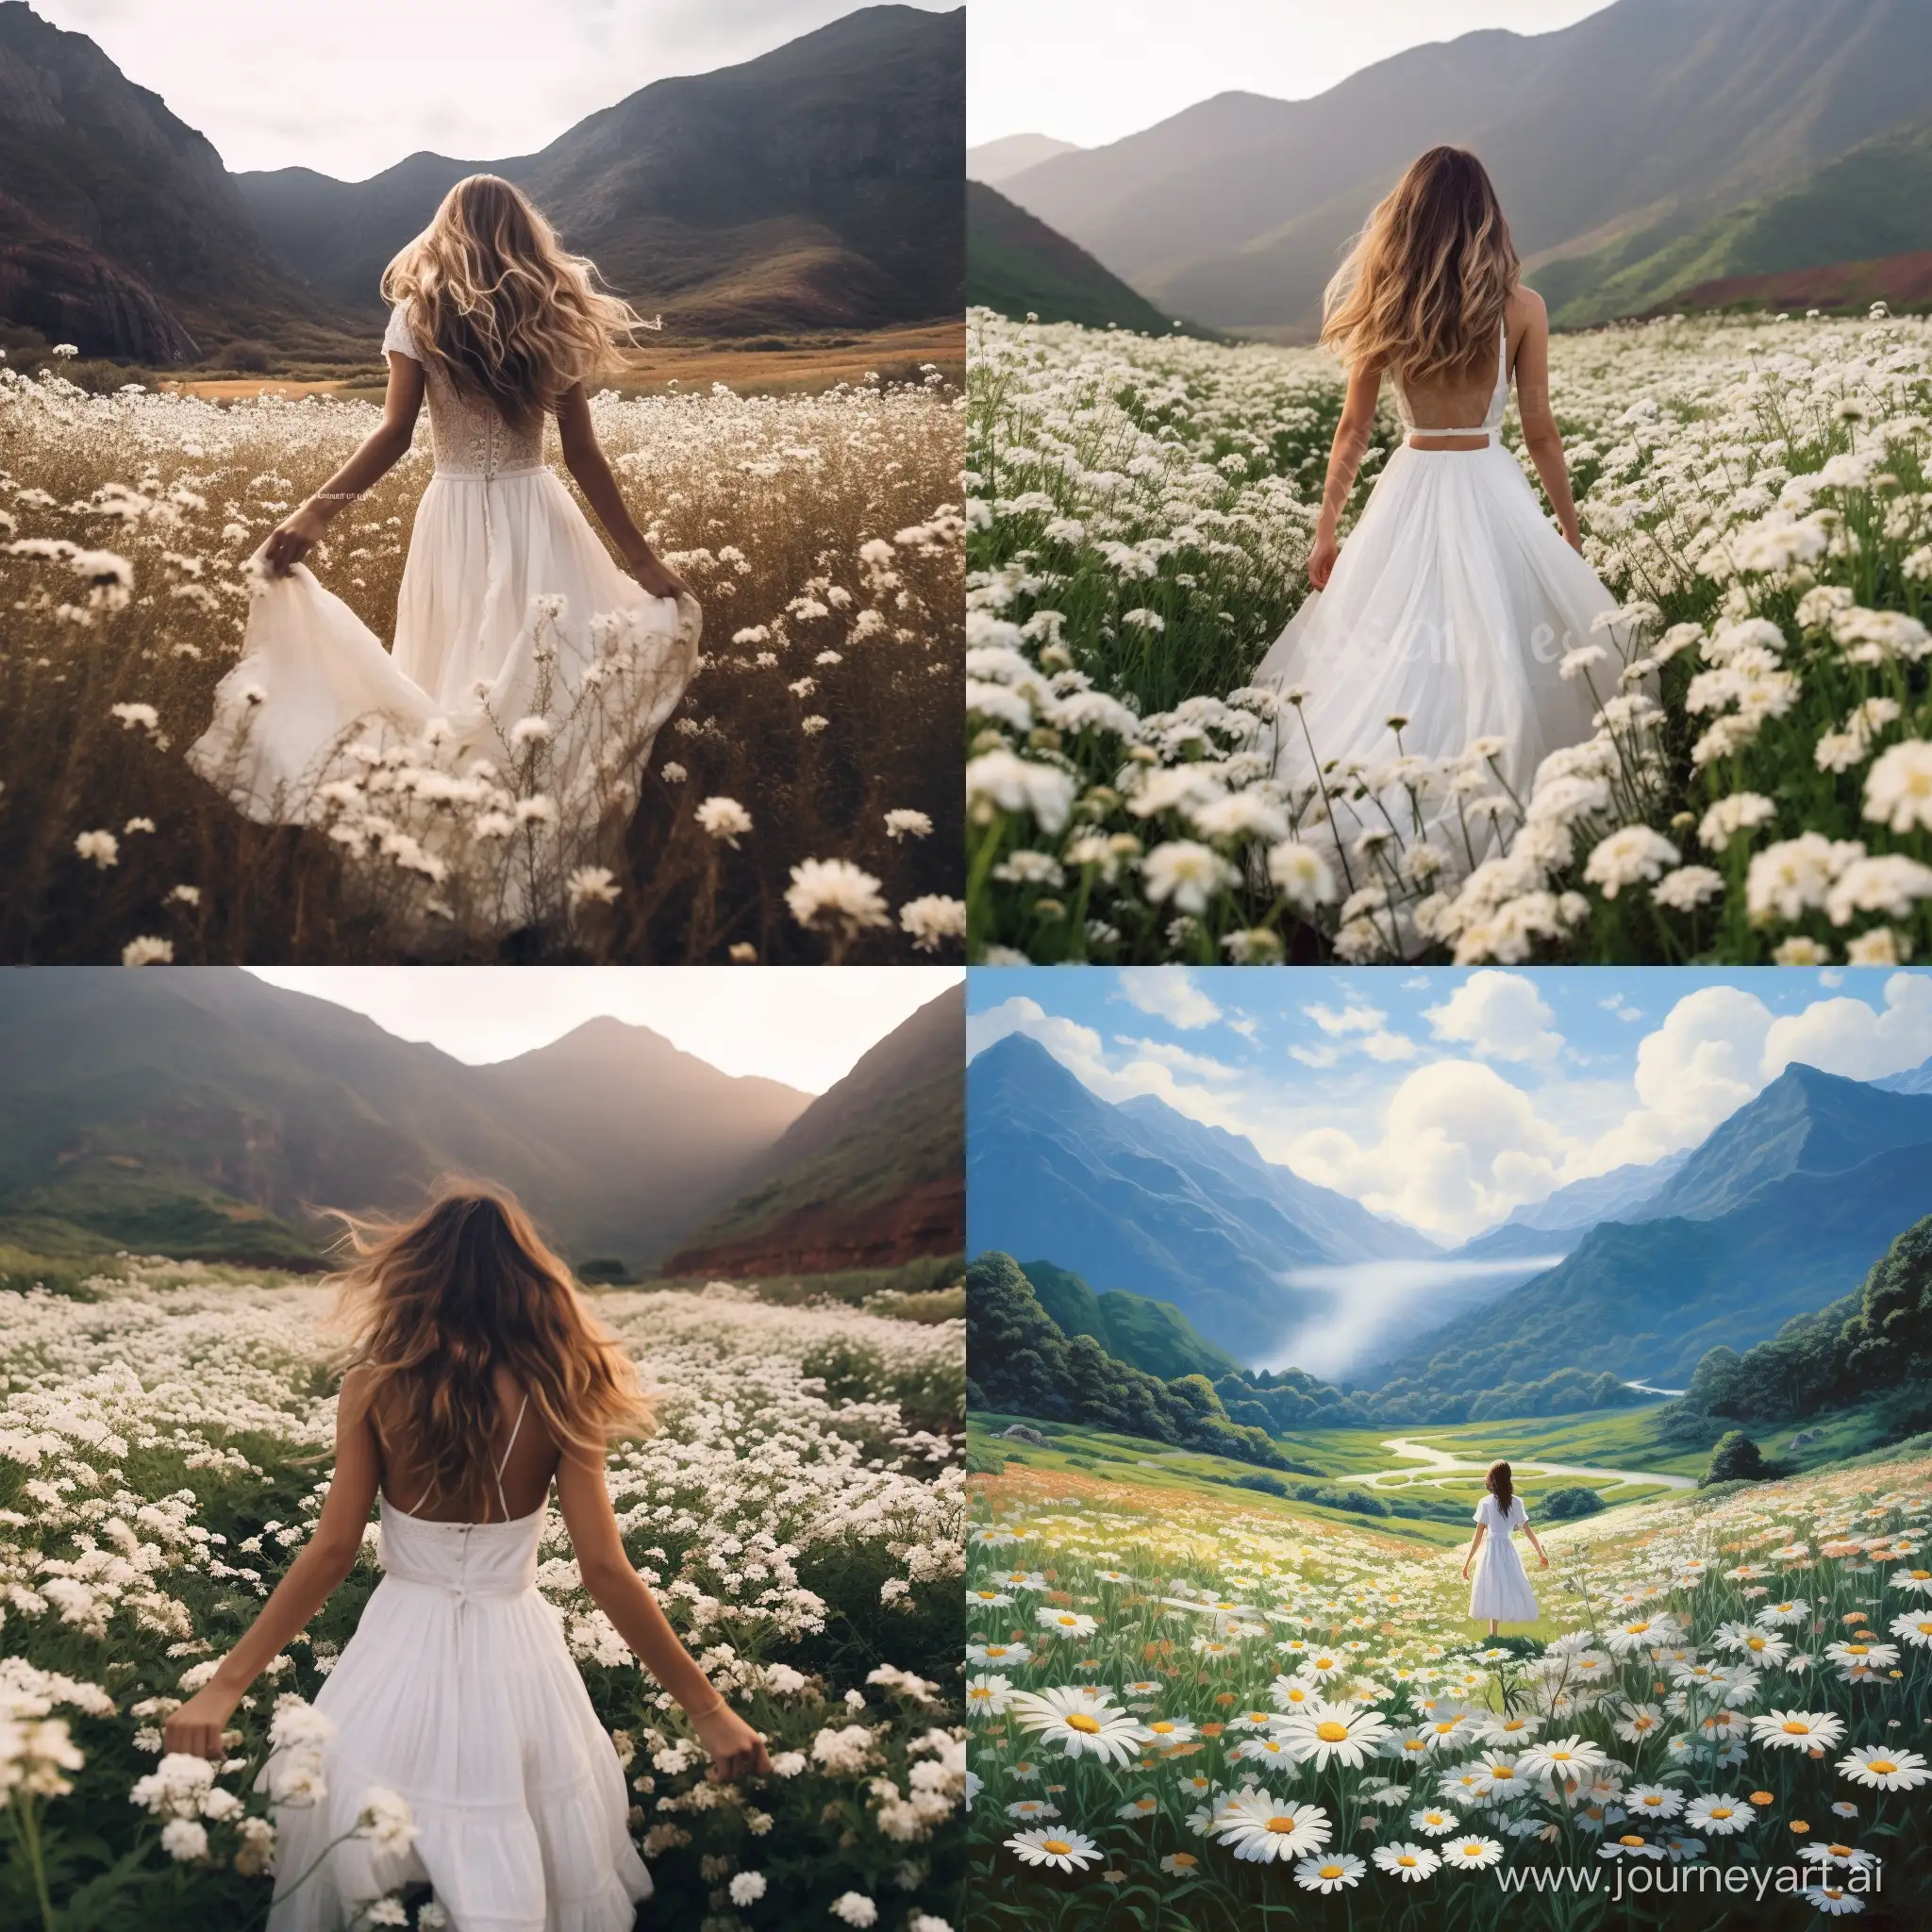 A girl in a white dress with a hand of white flowers in front of a mountain walking in a flower field